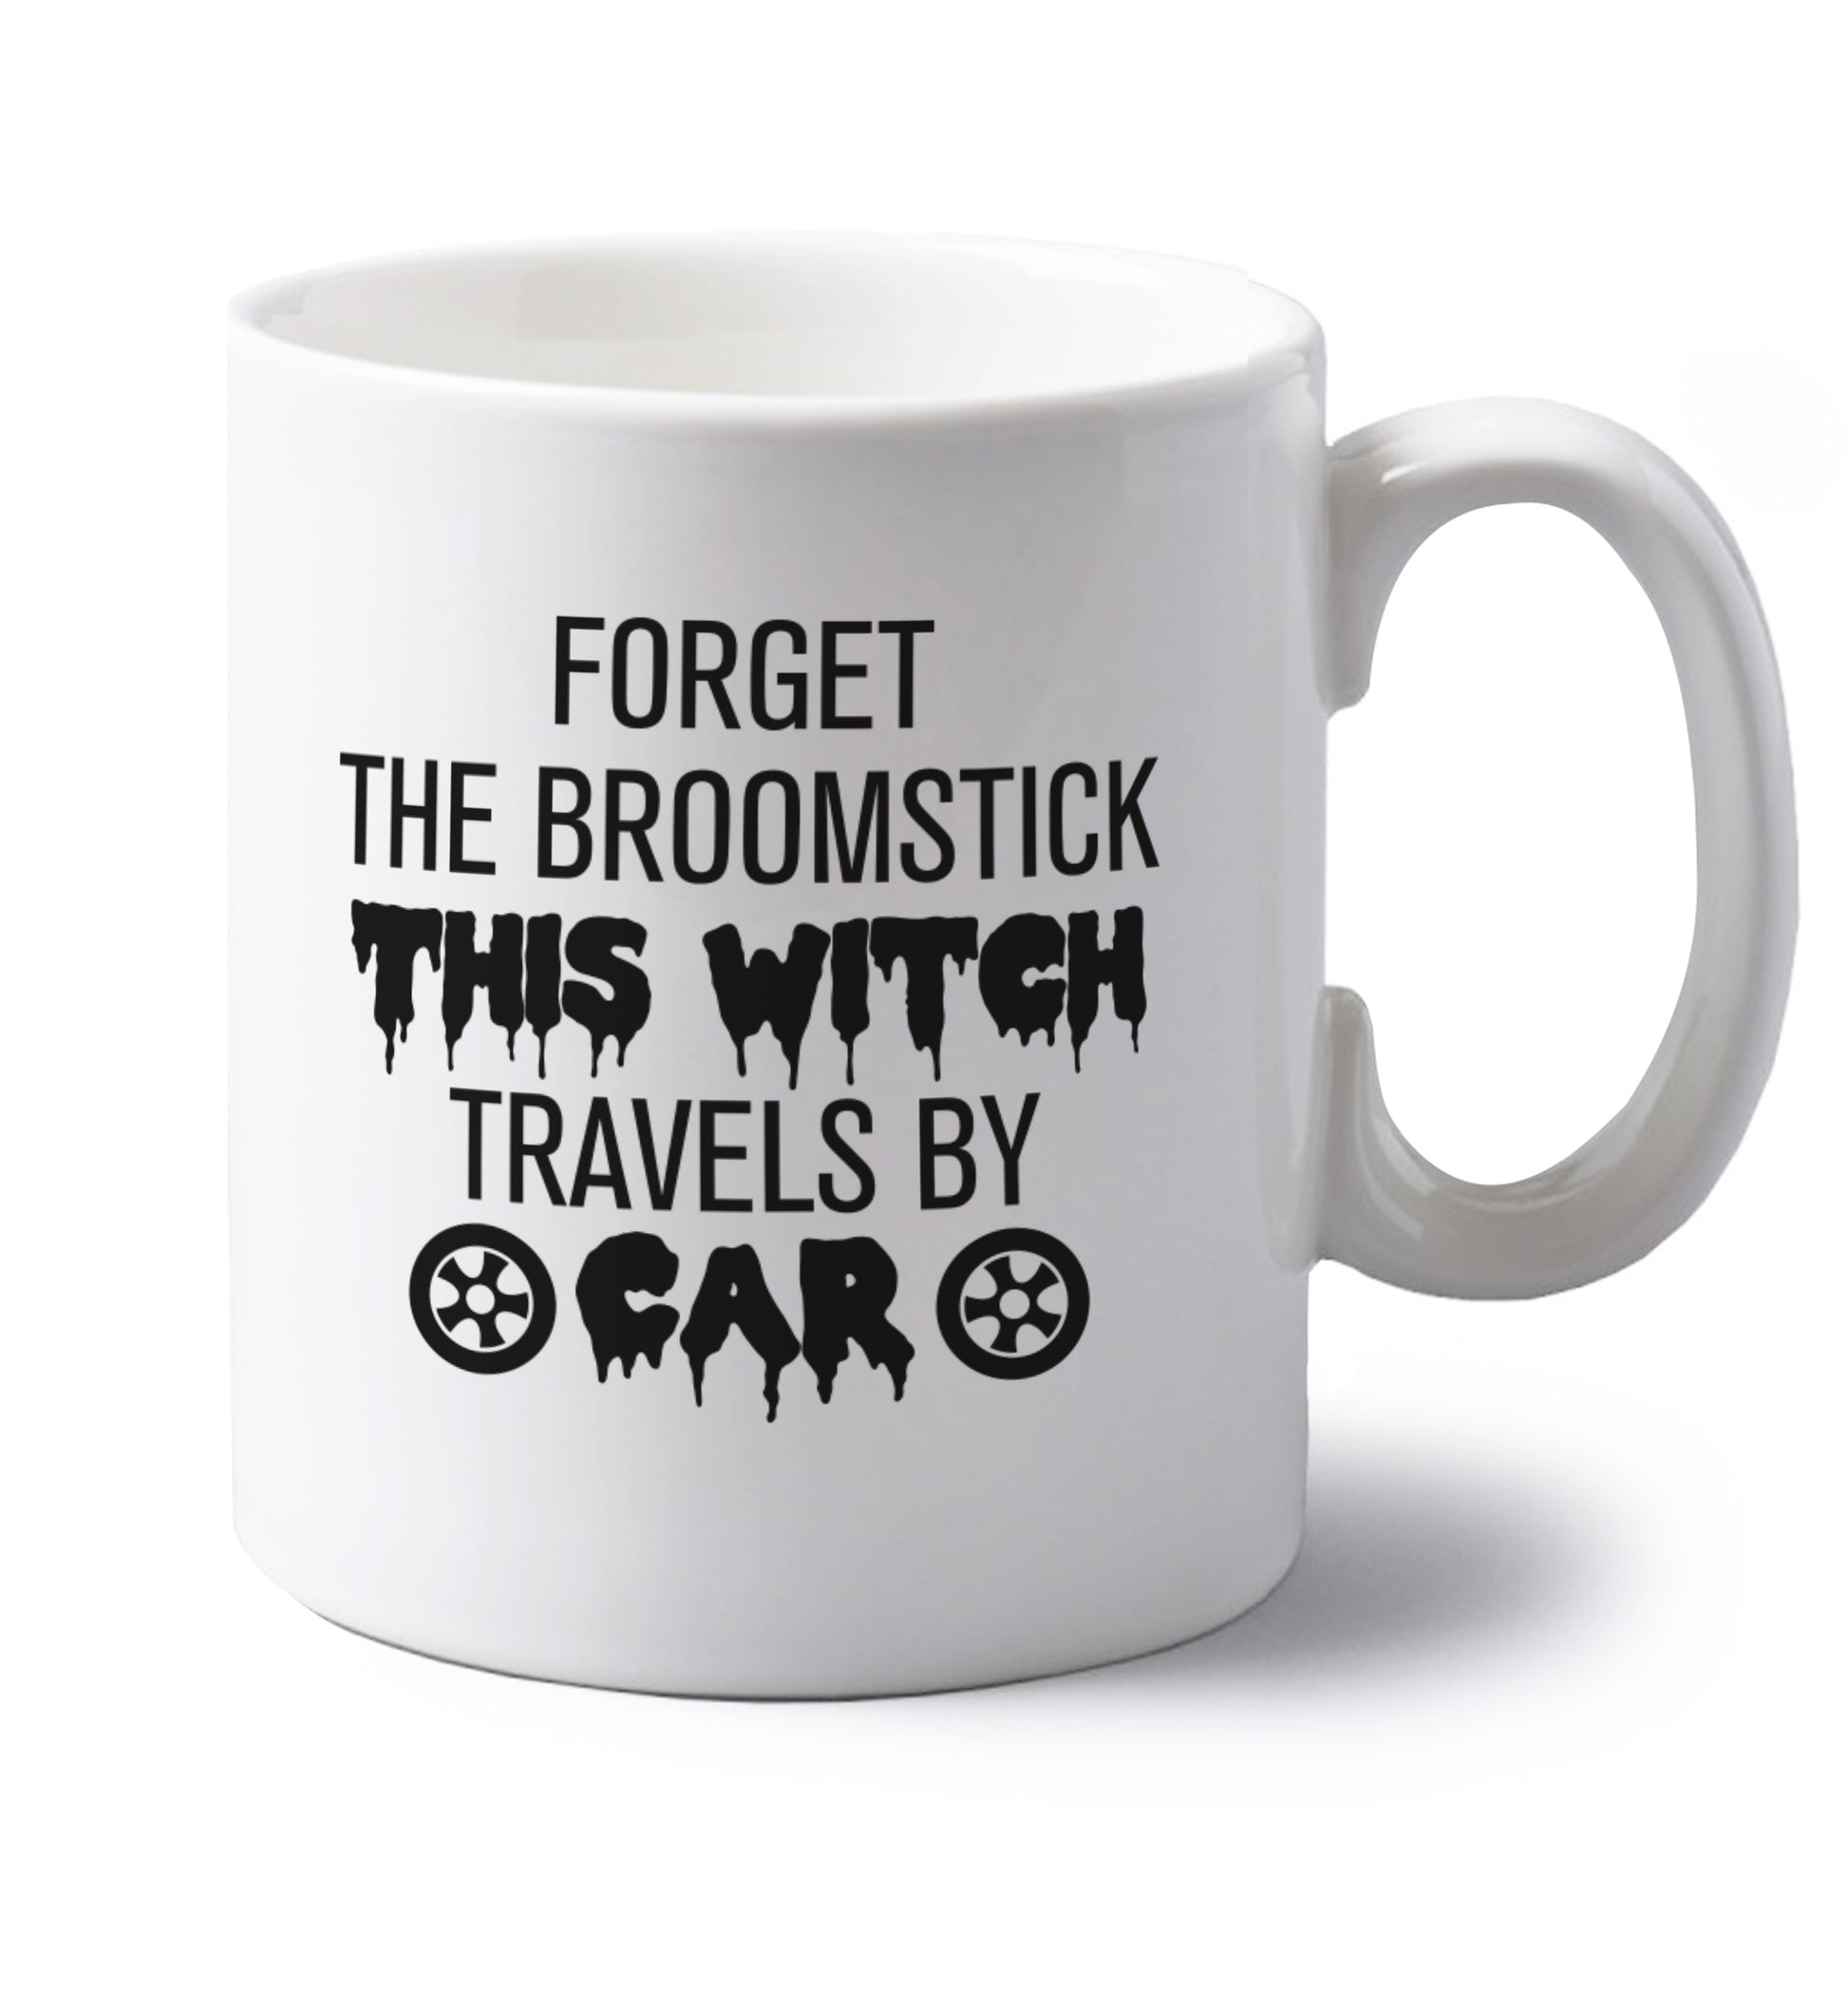 Forget the broomstick this witch travels by car left handed white ceramic mug 